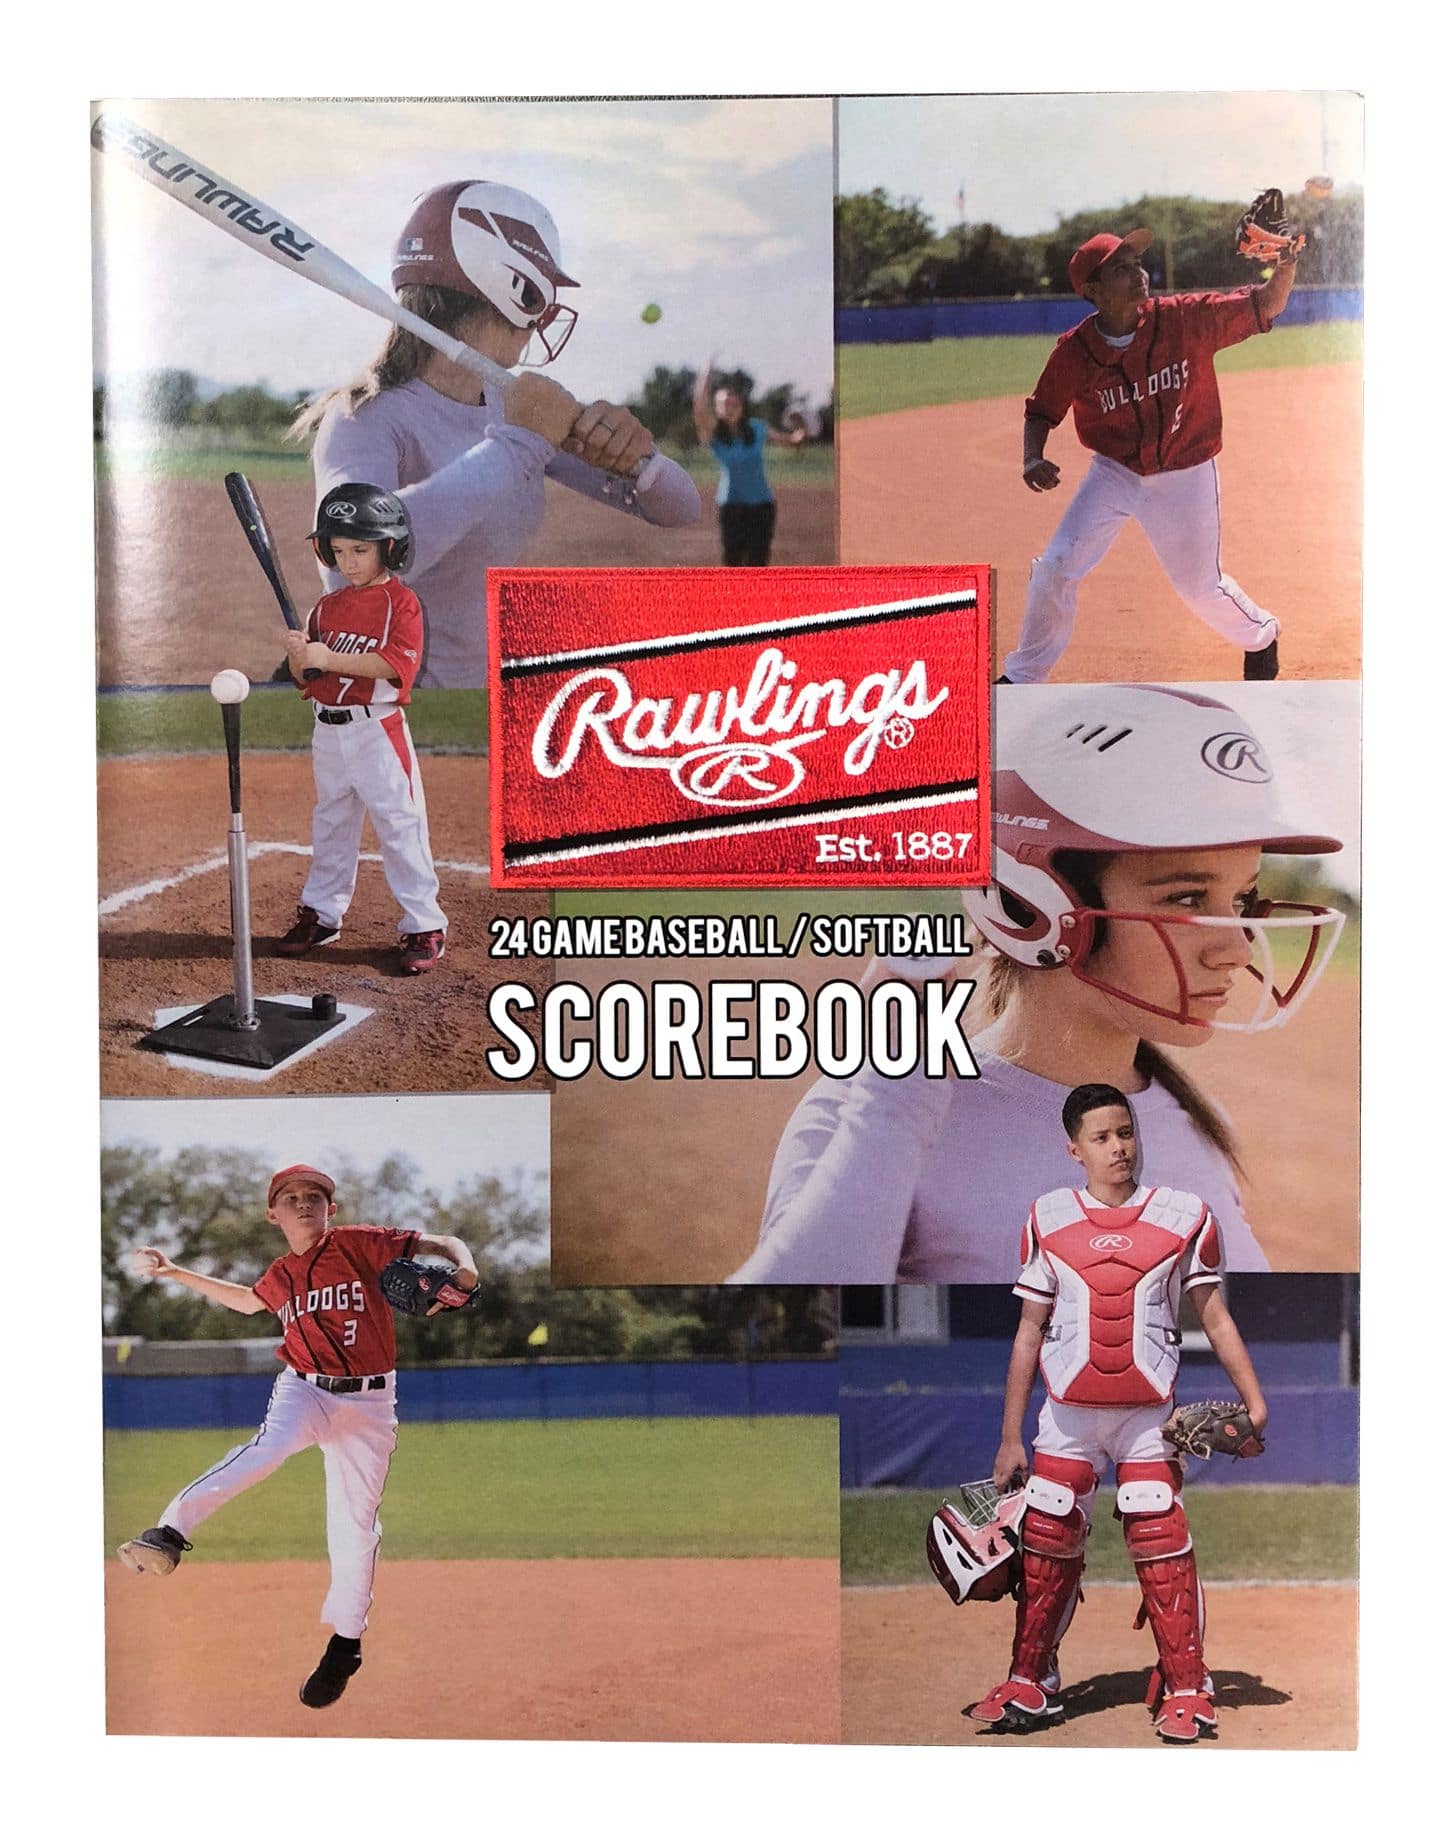 https://media-www.canadiantire.ca/product/playing/team-sports-and-golf/sports-equipment-accessories/0800088/rawlings-baseball-score-book-bd8591ac-1a98-4637-b8fc-535858b2b3d1-jpgrendition.jpg